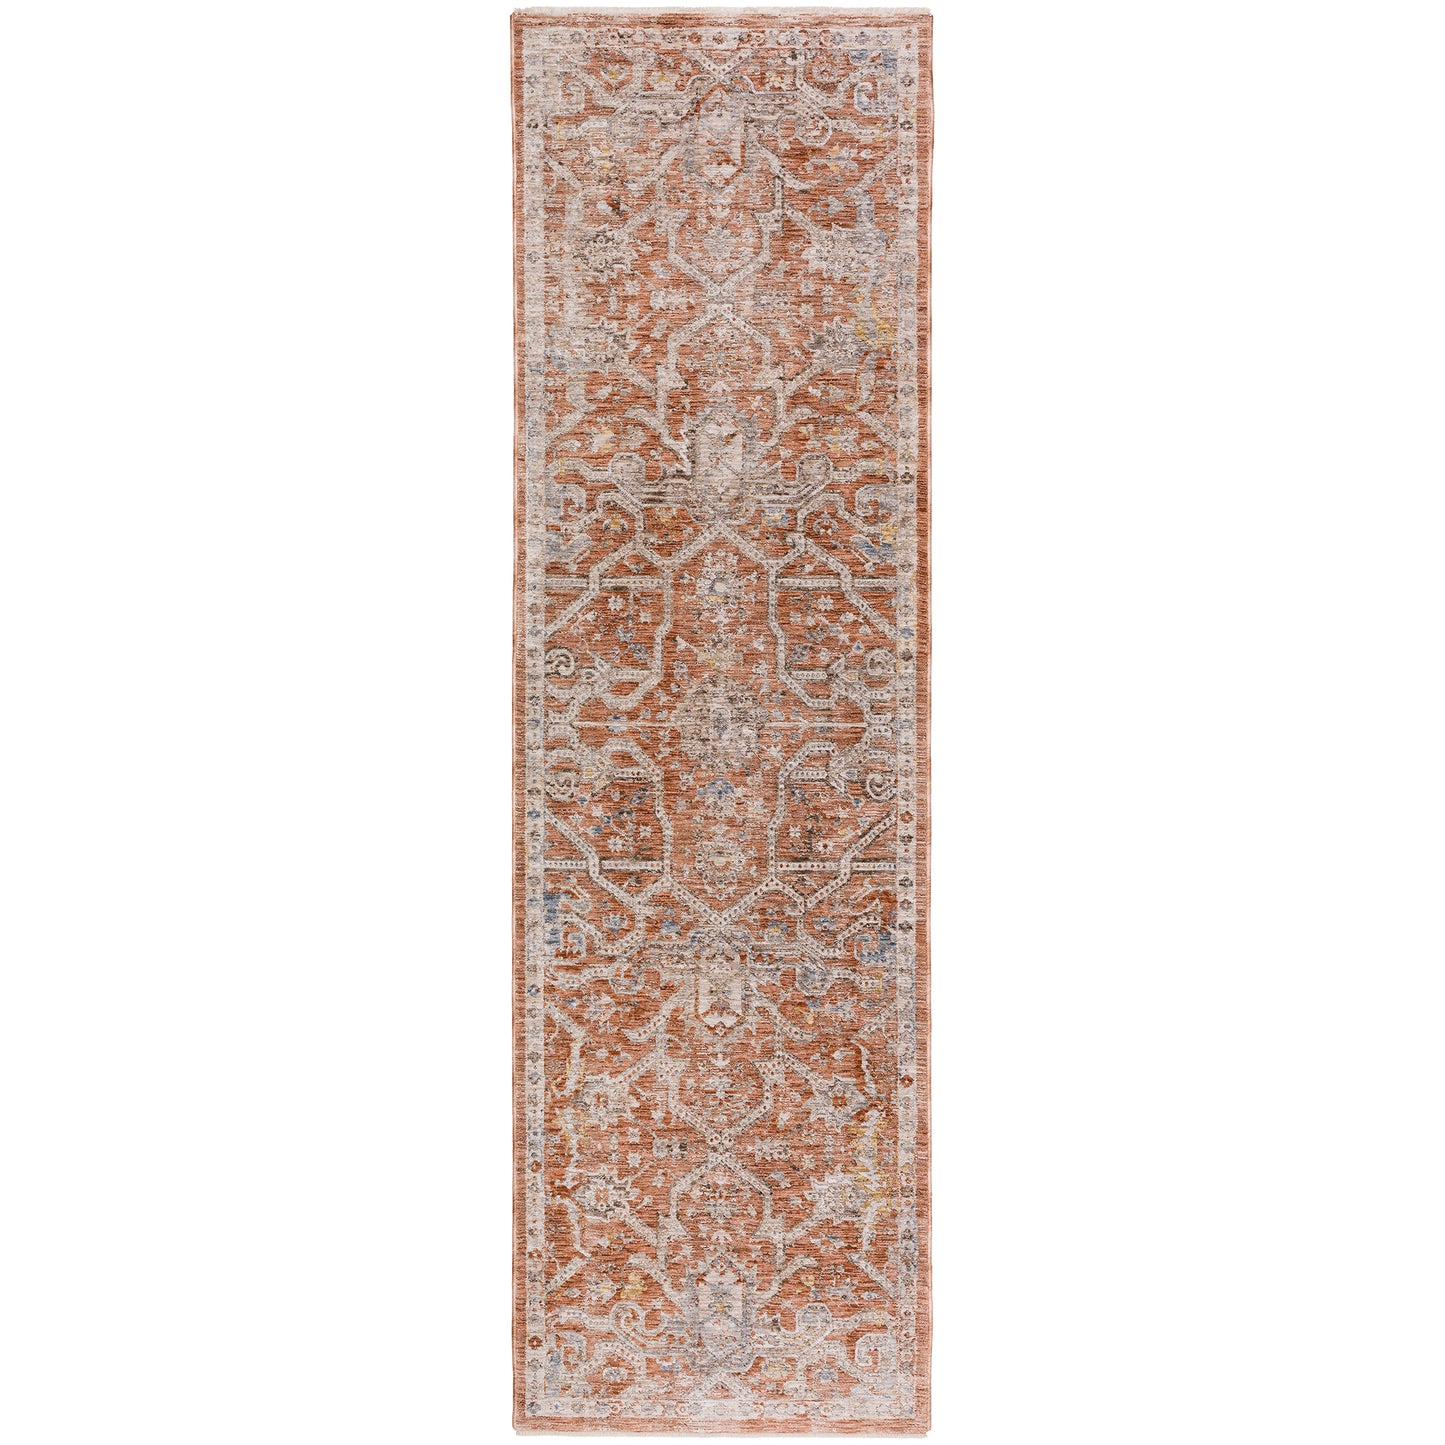 Dalyn Rugs Vienna VI1 Spice  Traditional Power Woven Rug